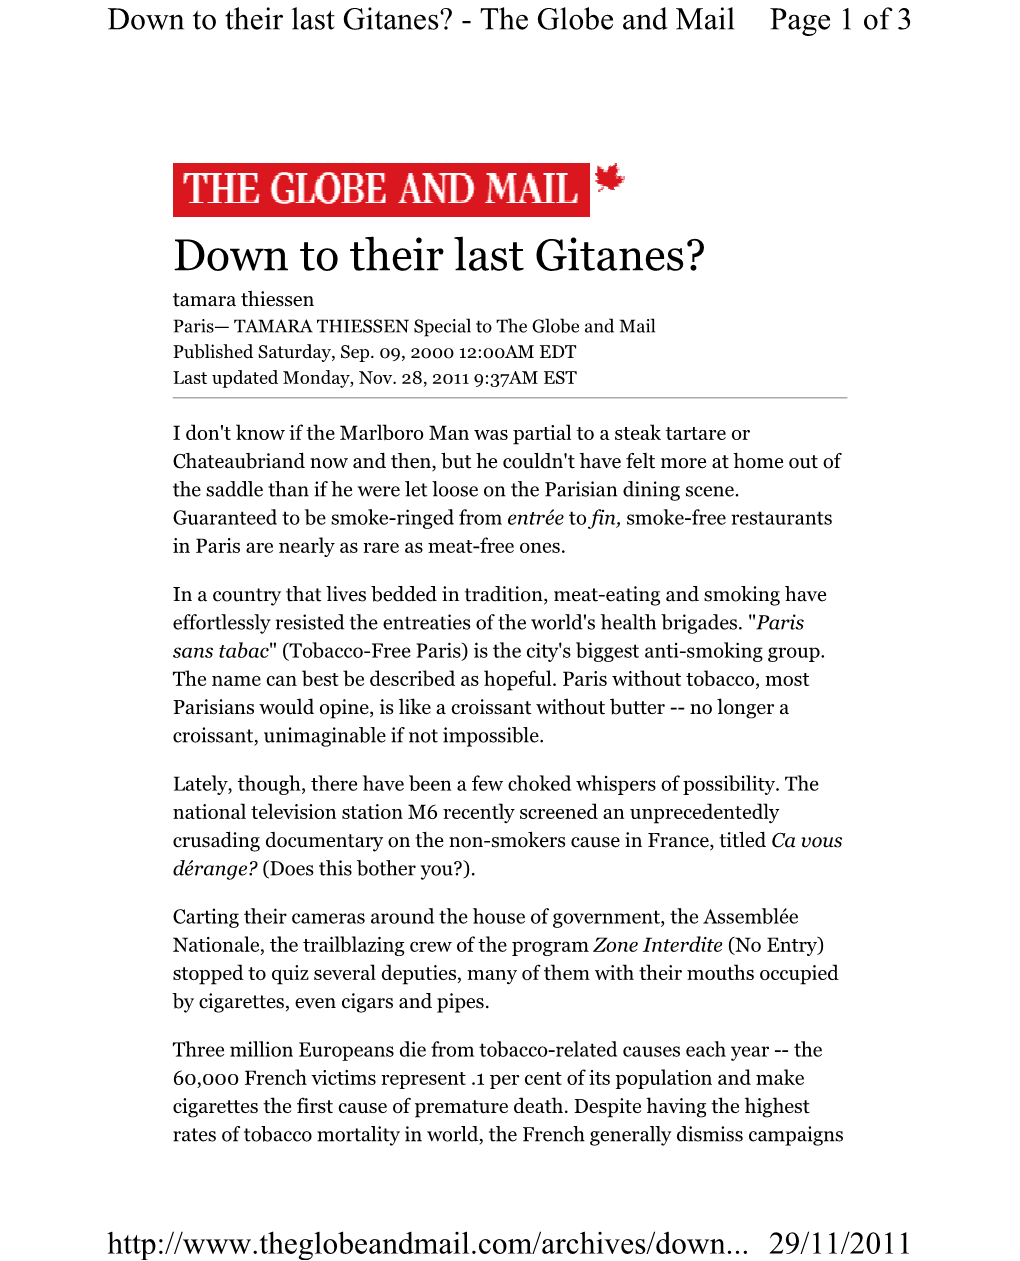 Down to Their Last Gitanes? - the Globe and Mail Page 1 of 3